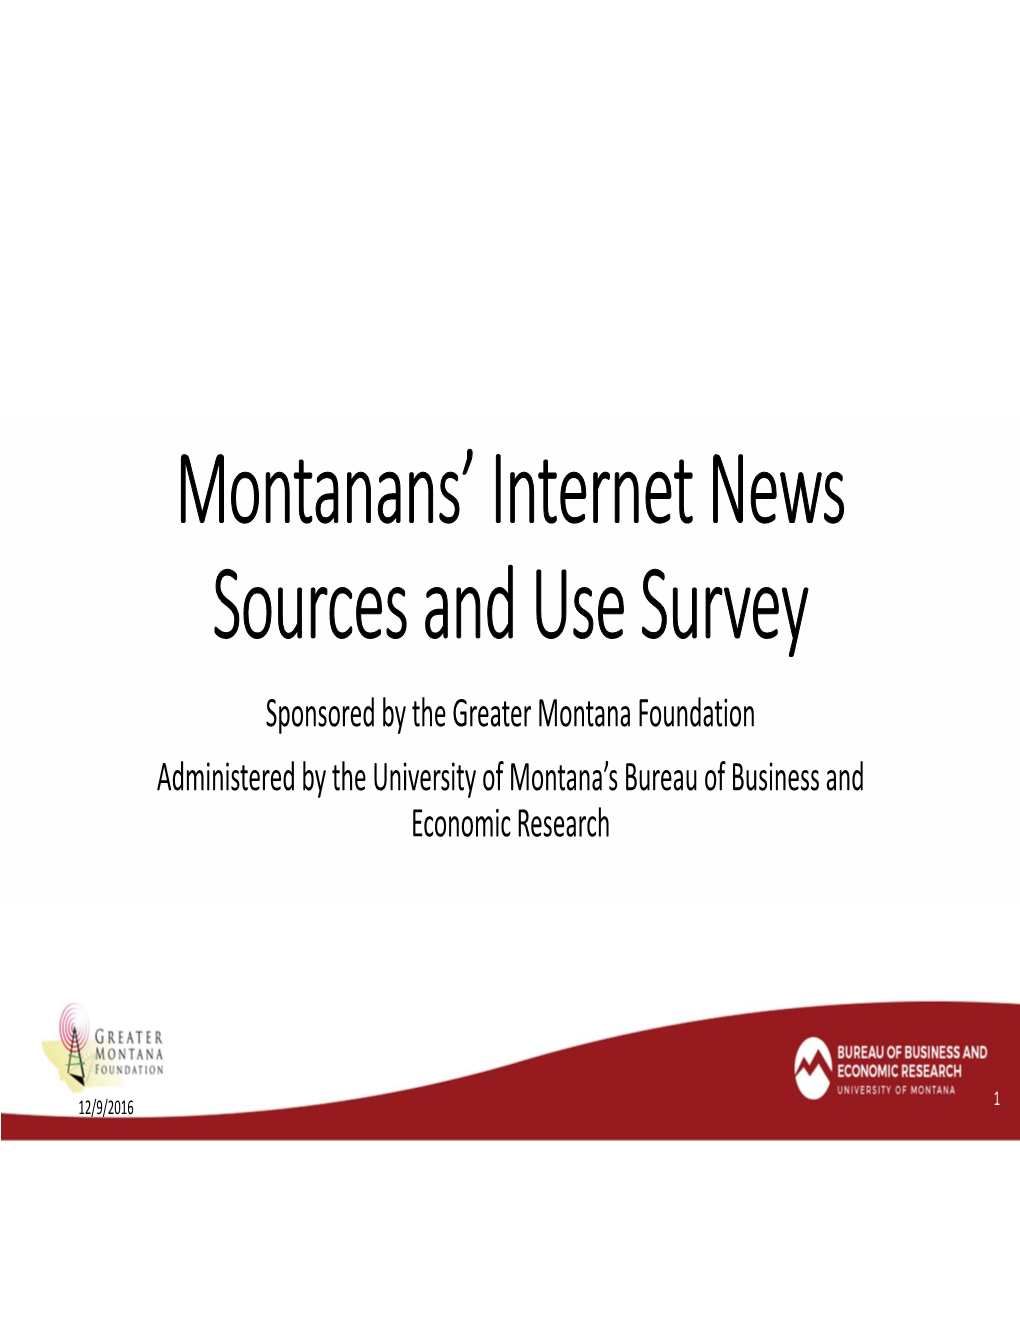 Montanans' Internet News Sources and Use Survey